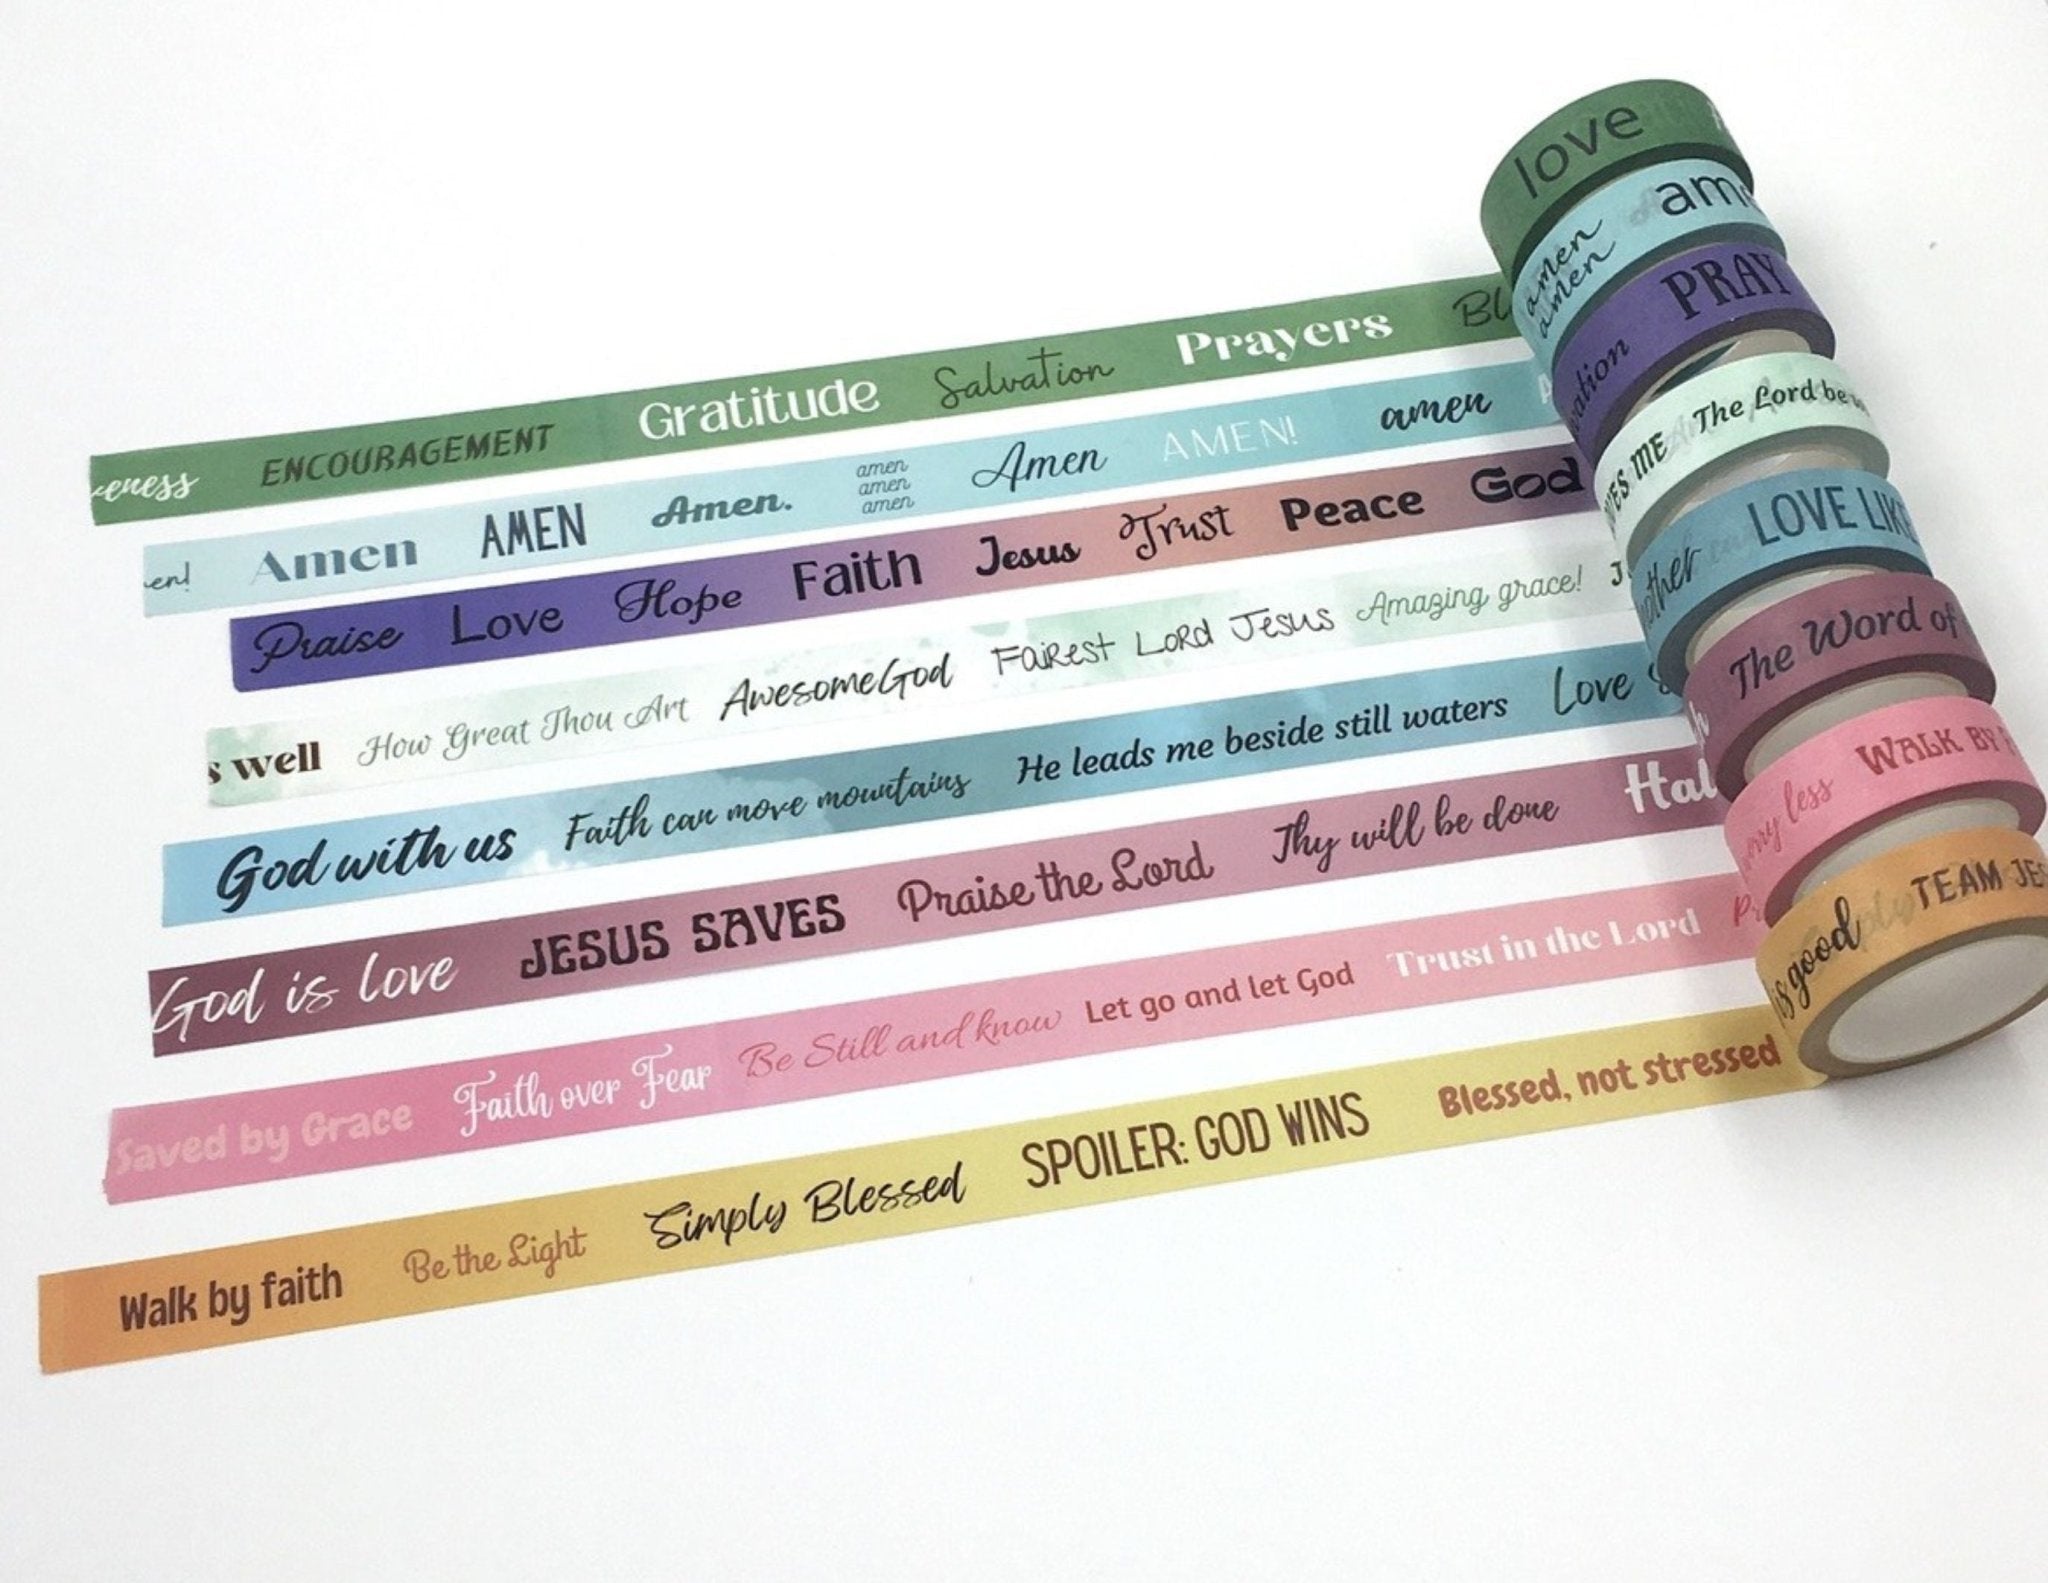 Scriptural Accents Washi Tape – Blessed Be Boutique